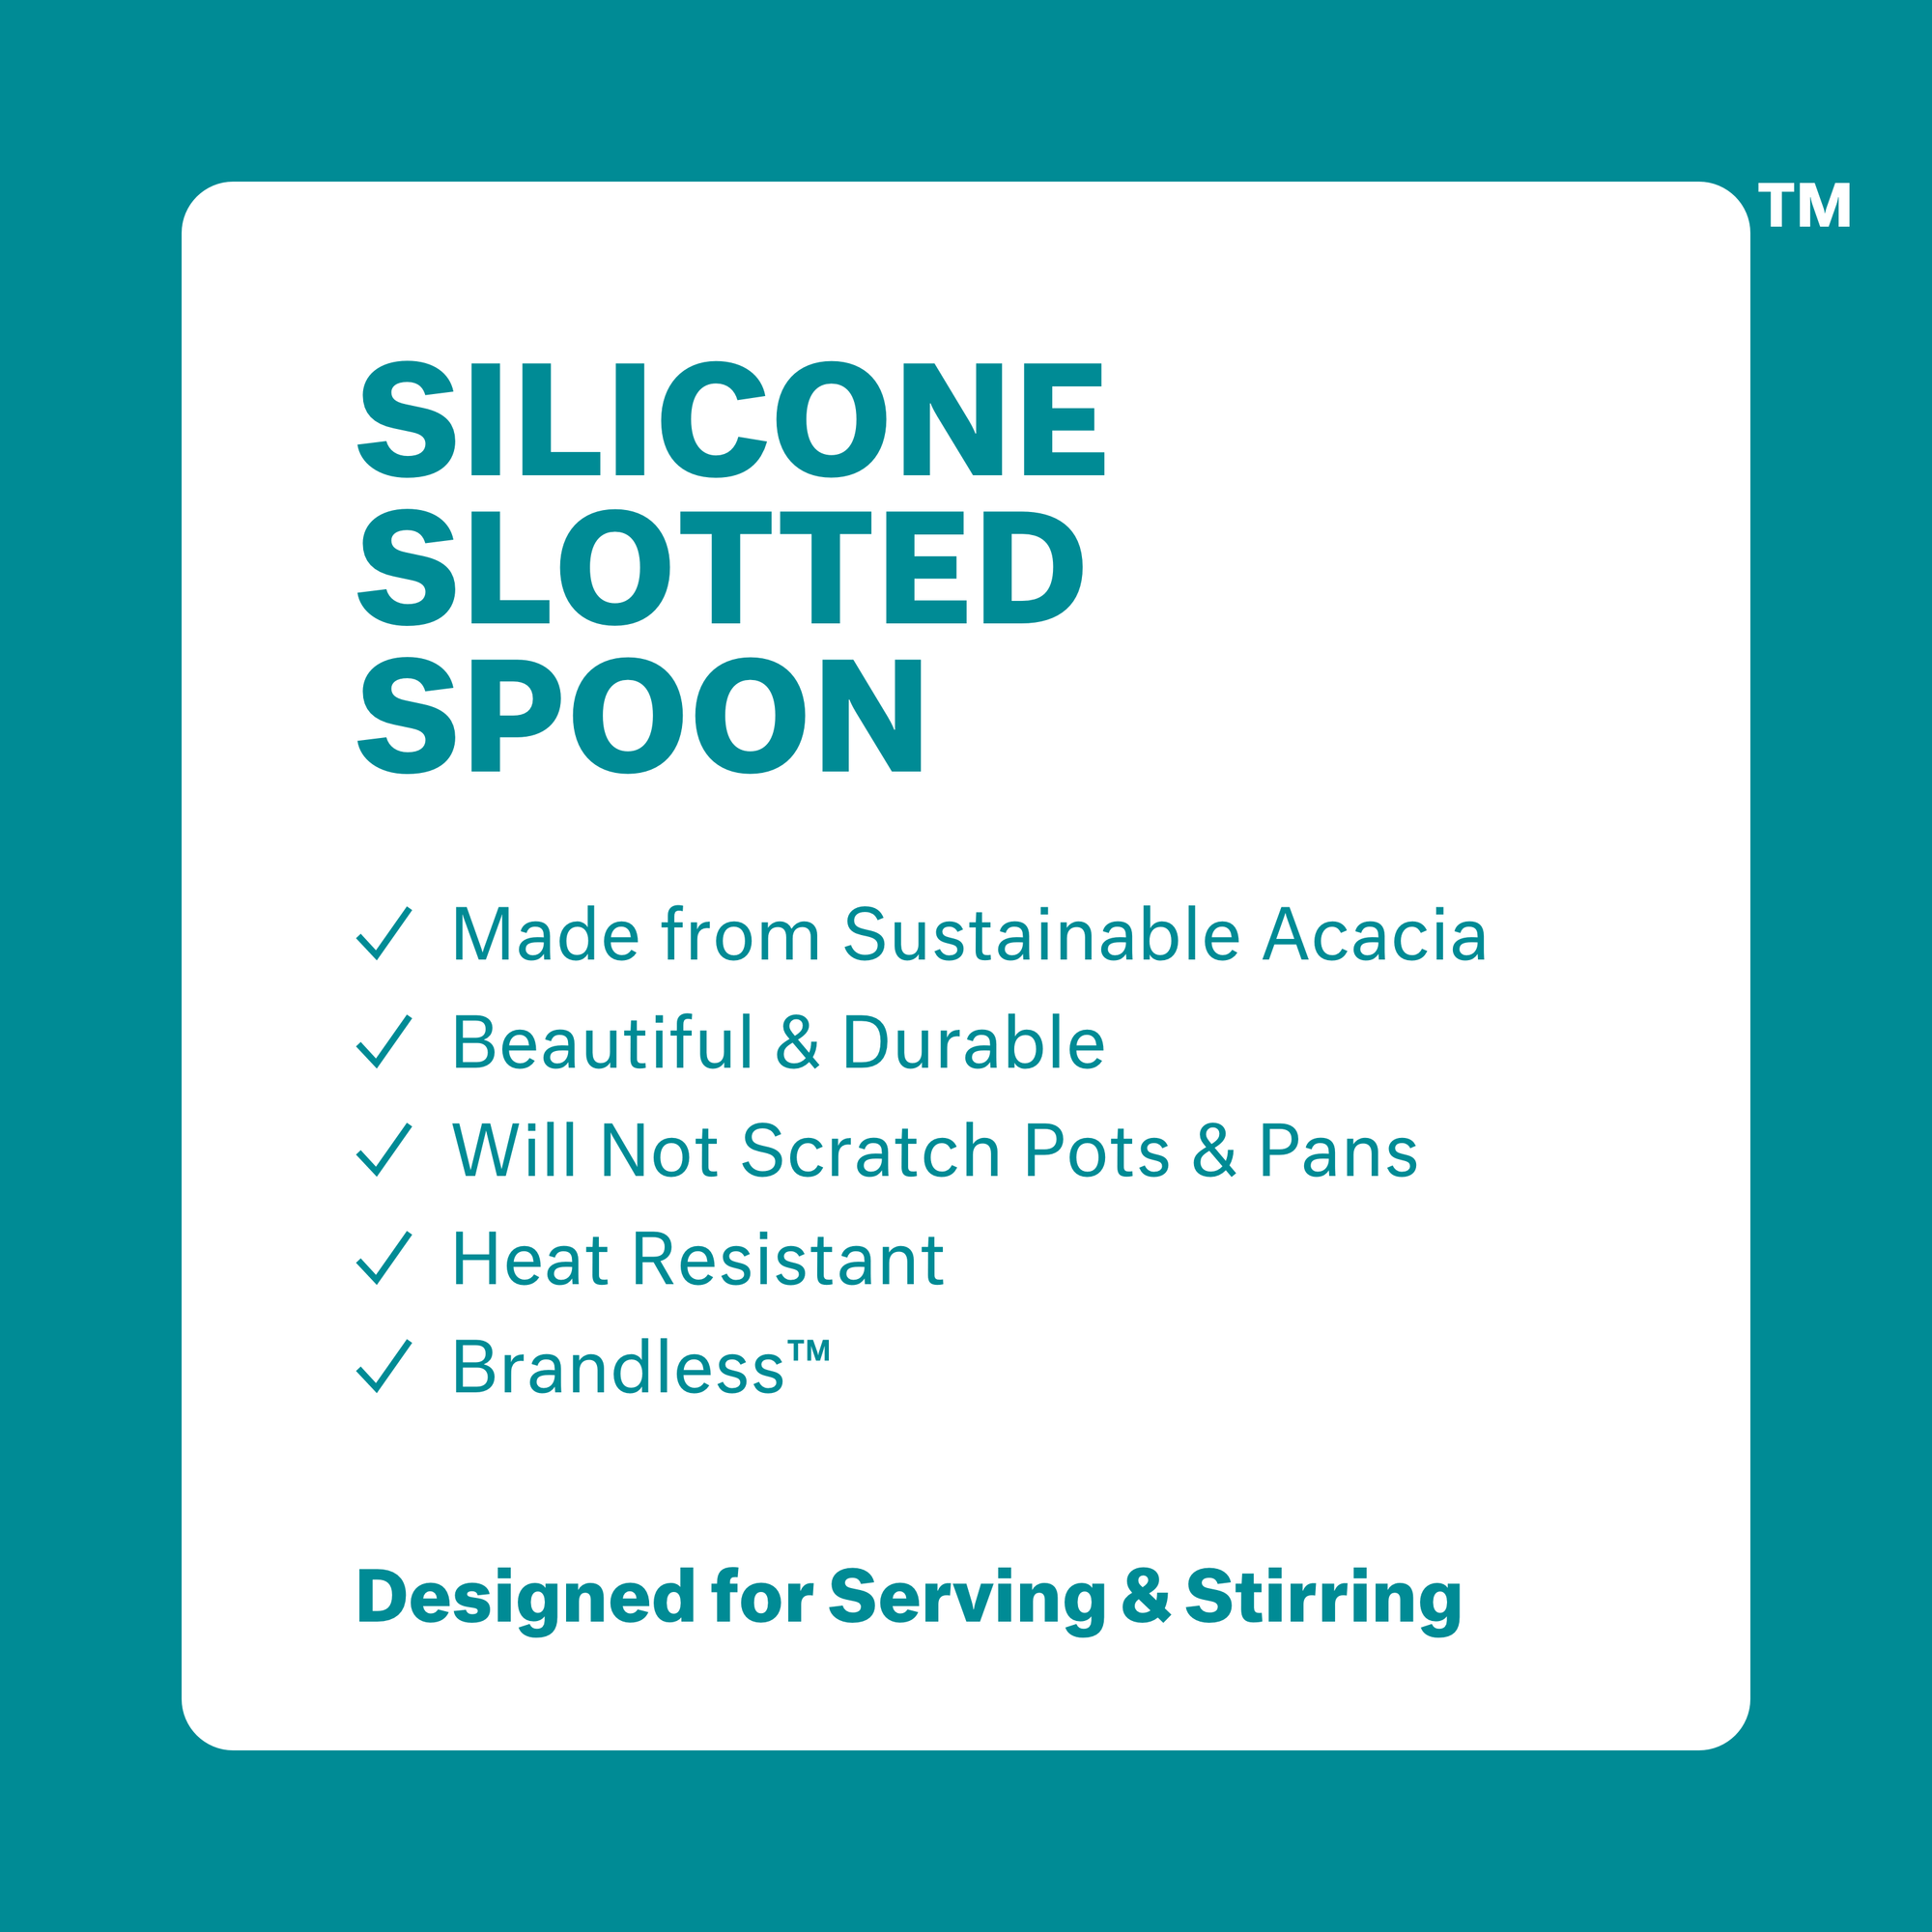 https://cdn.shopify.com/s/files/1/0291/6427/3757/products/53044_silicone_slotted_serving_spoon_atsq_2000x.png?v=1671781133